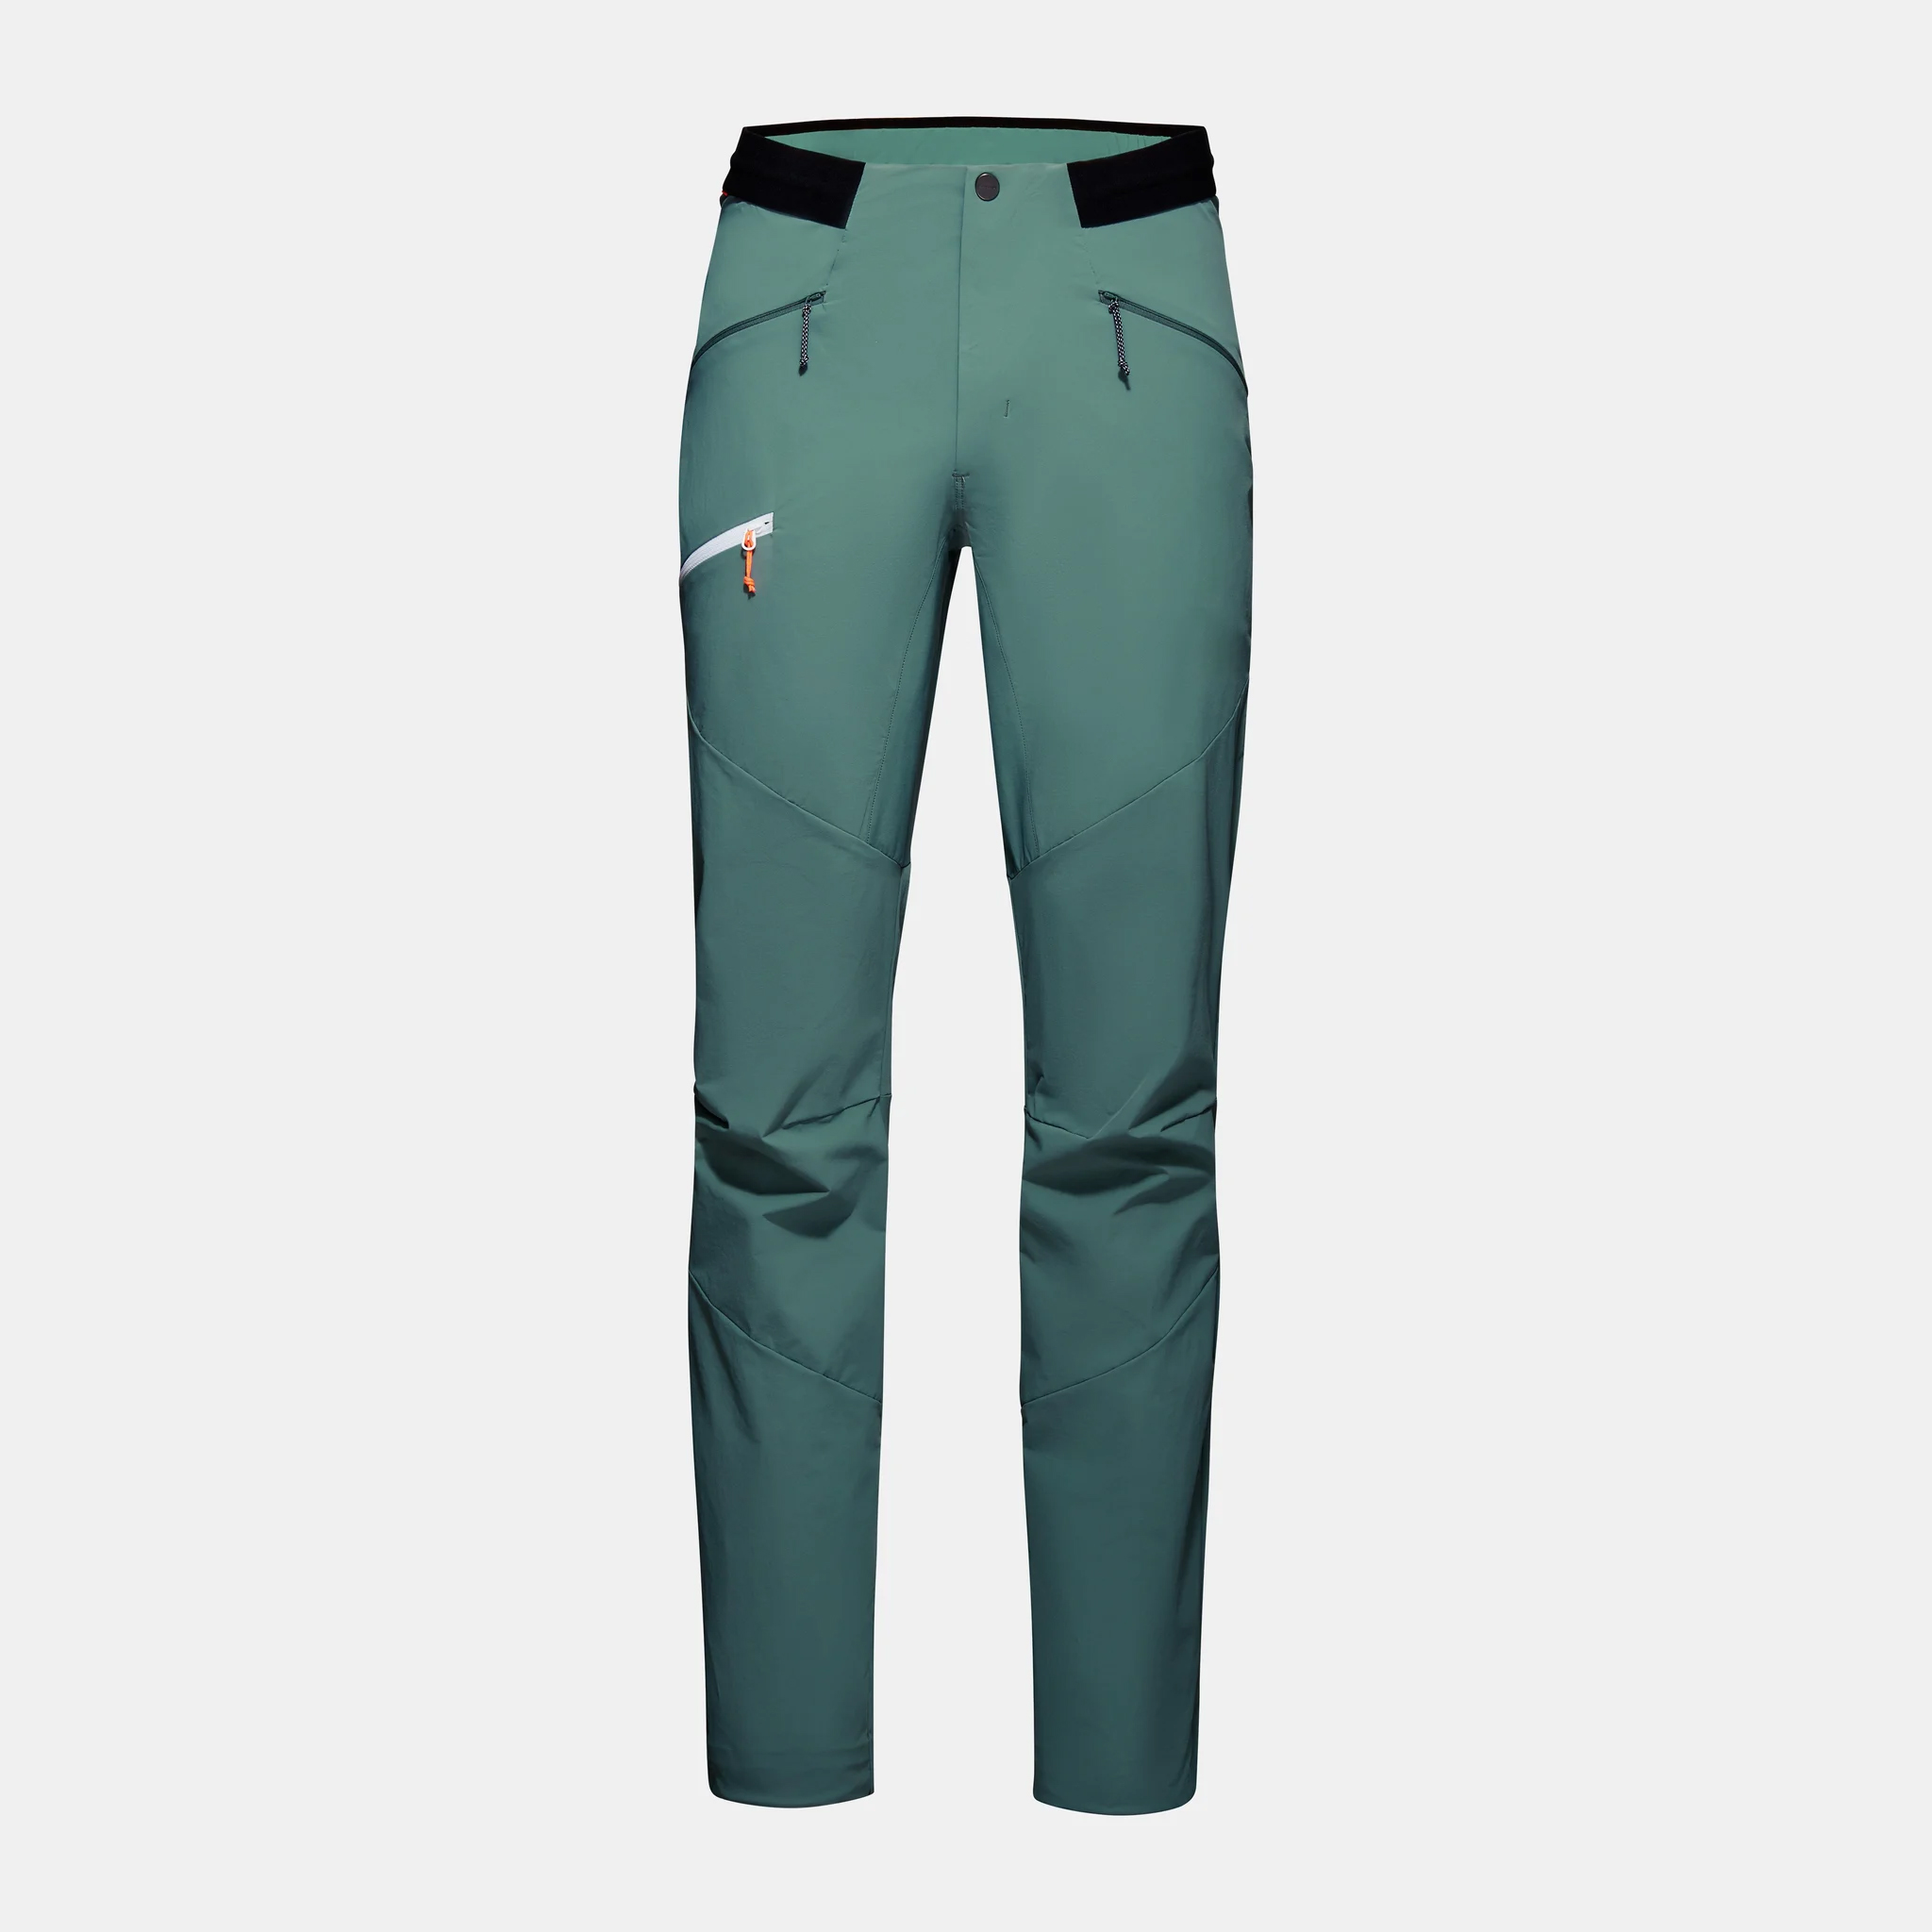 Mens Ultra-light and durable softshell pants